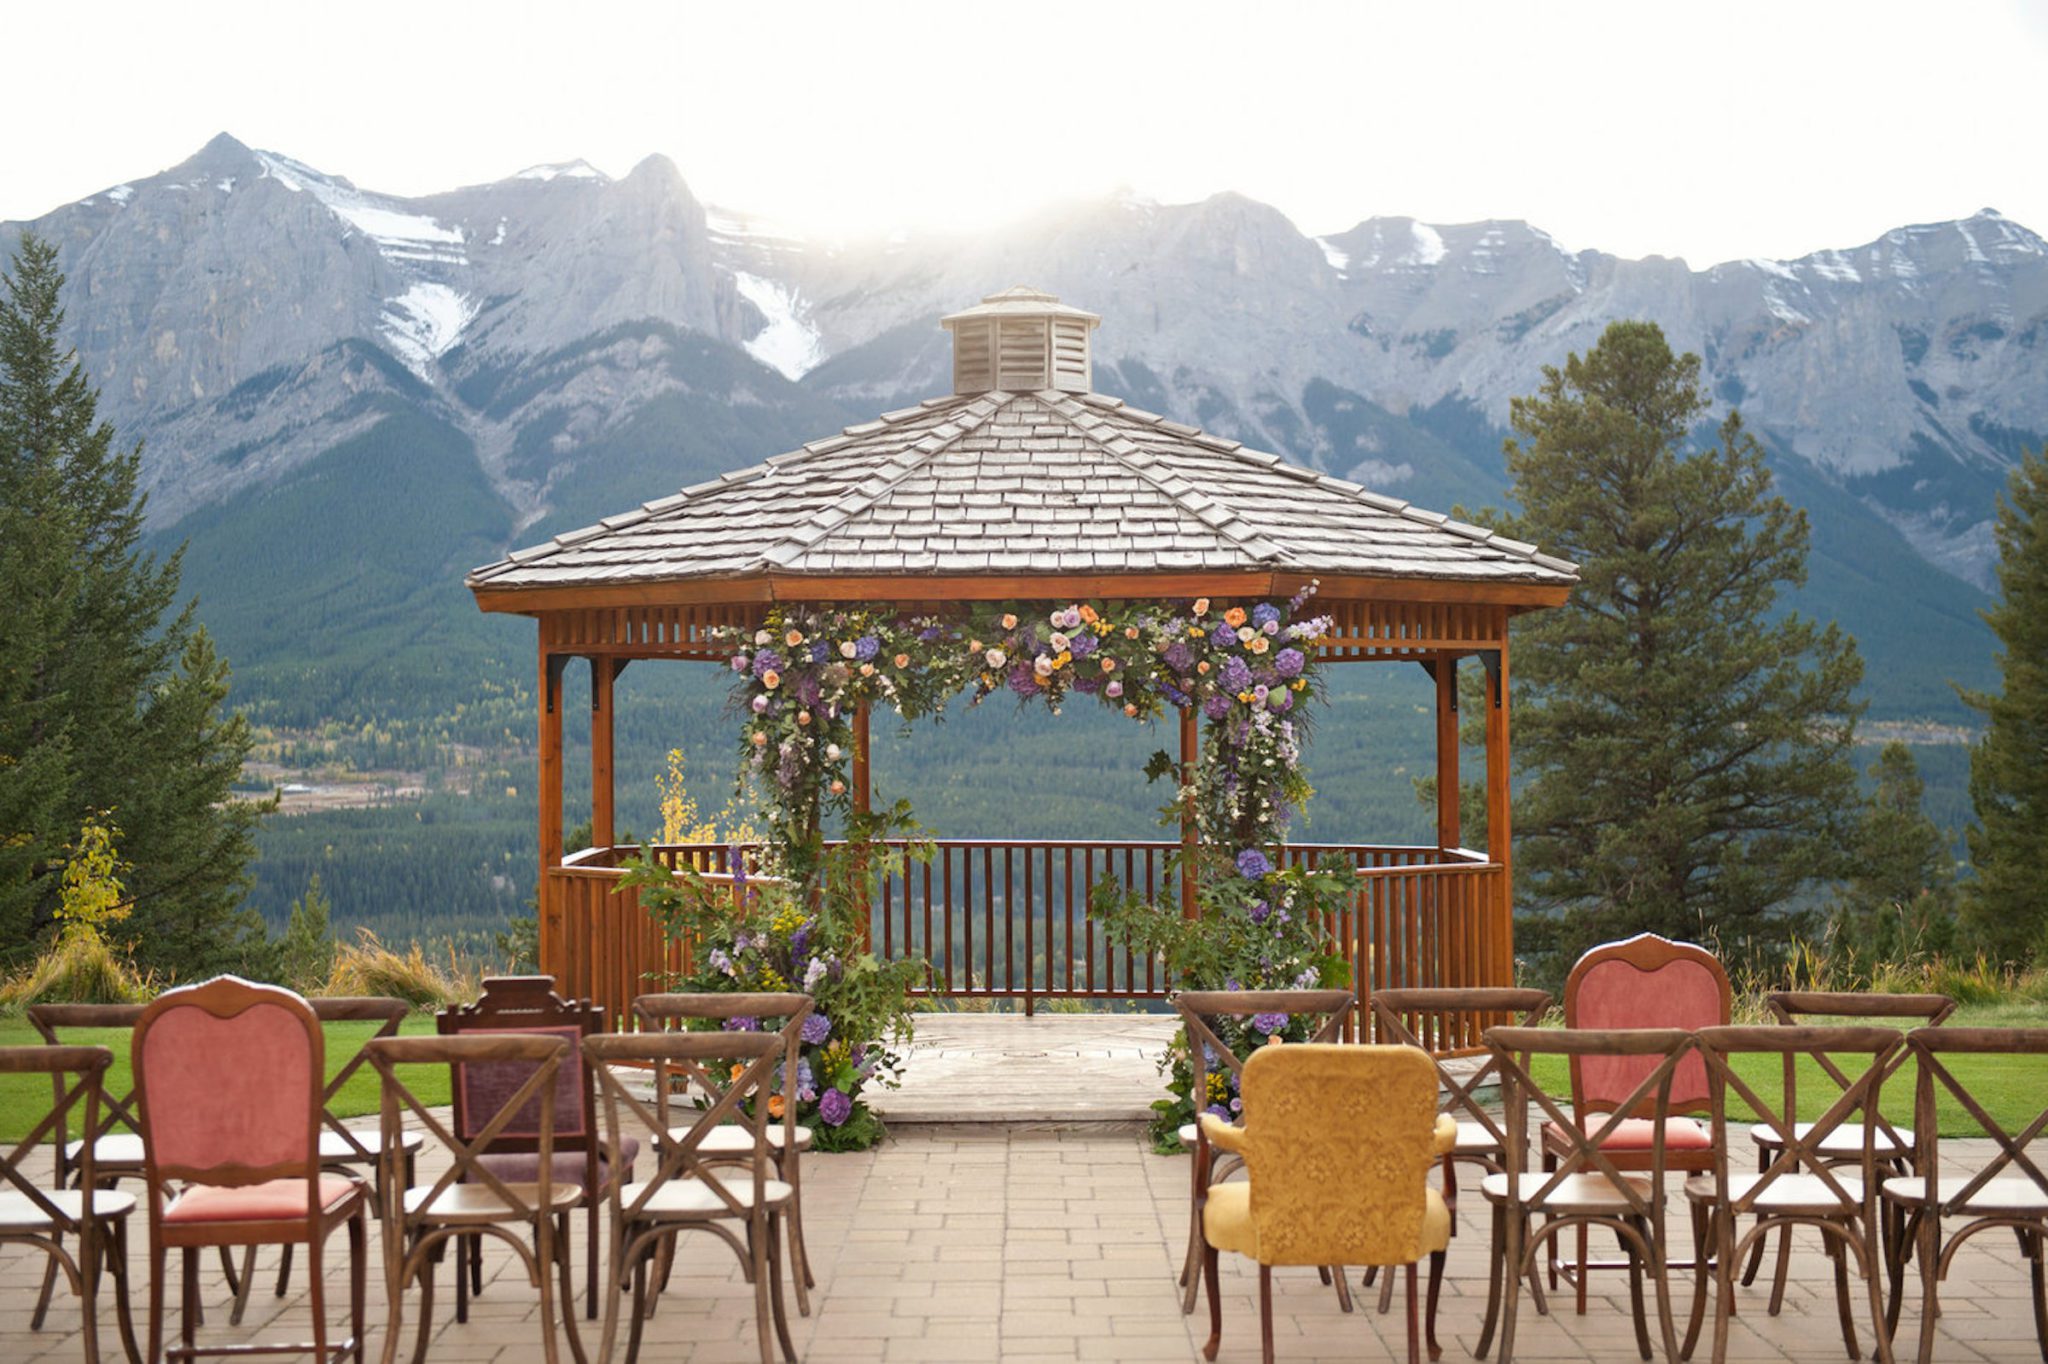 Vintage and rustic ceremony design at with purple flowers and greenery at Silvertip Resort in Canmore Alberta